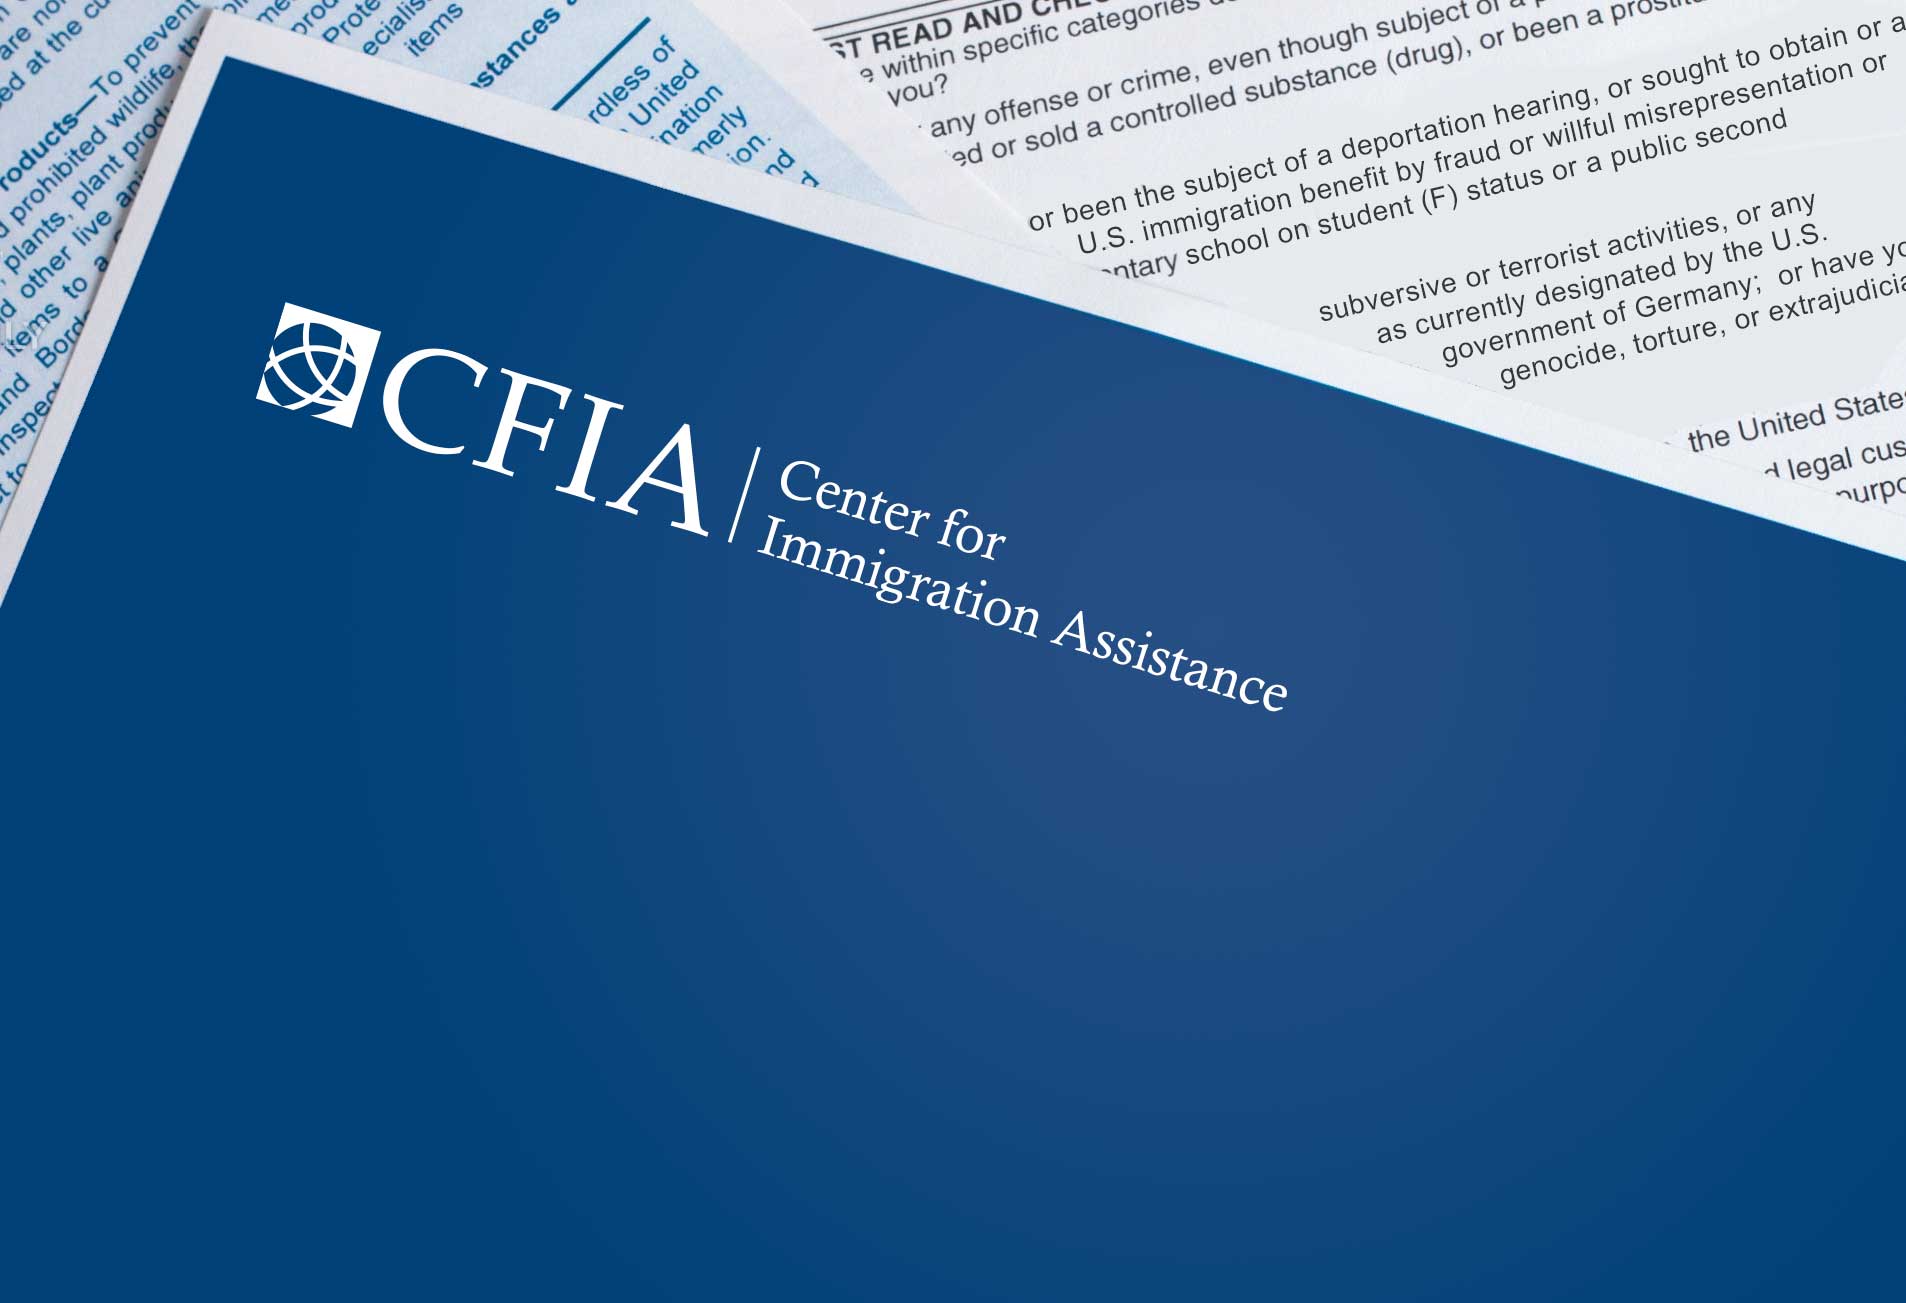 Center for Immigration Assistance